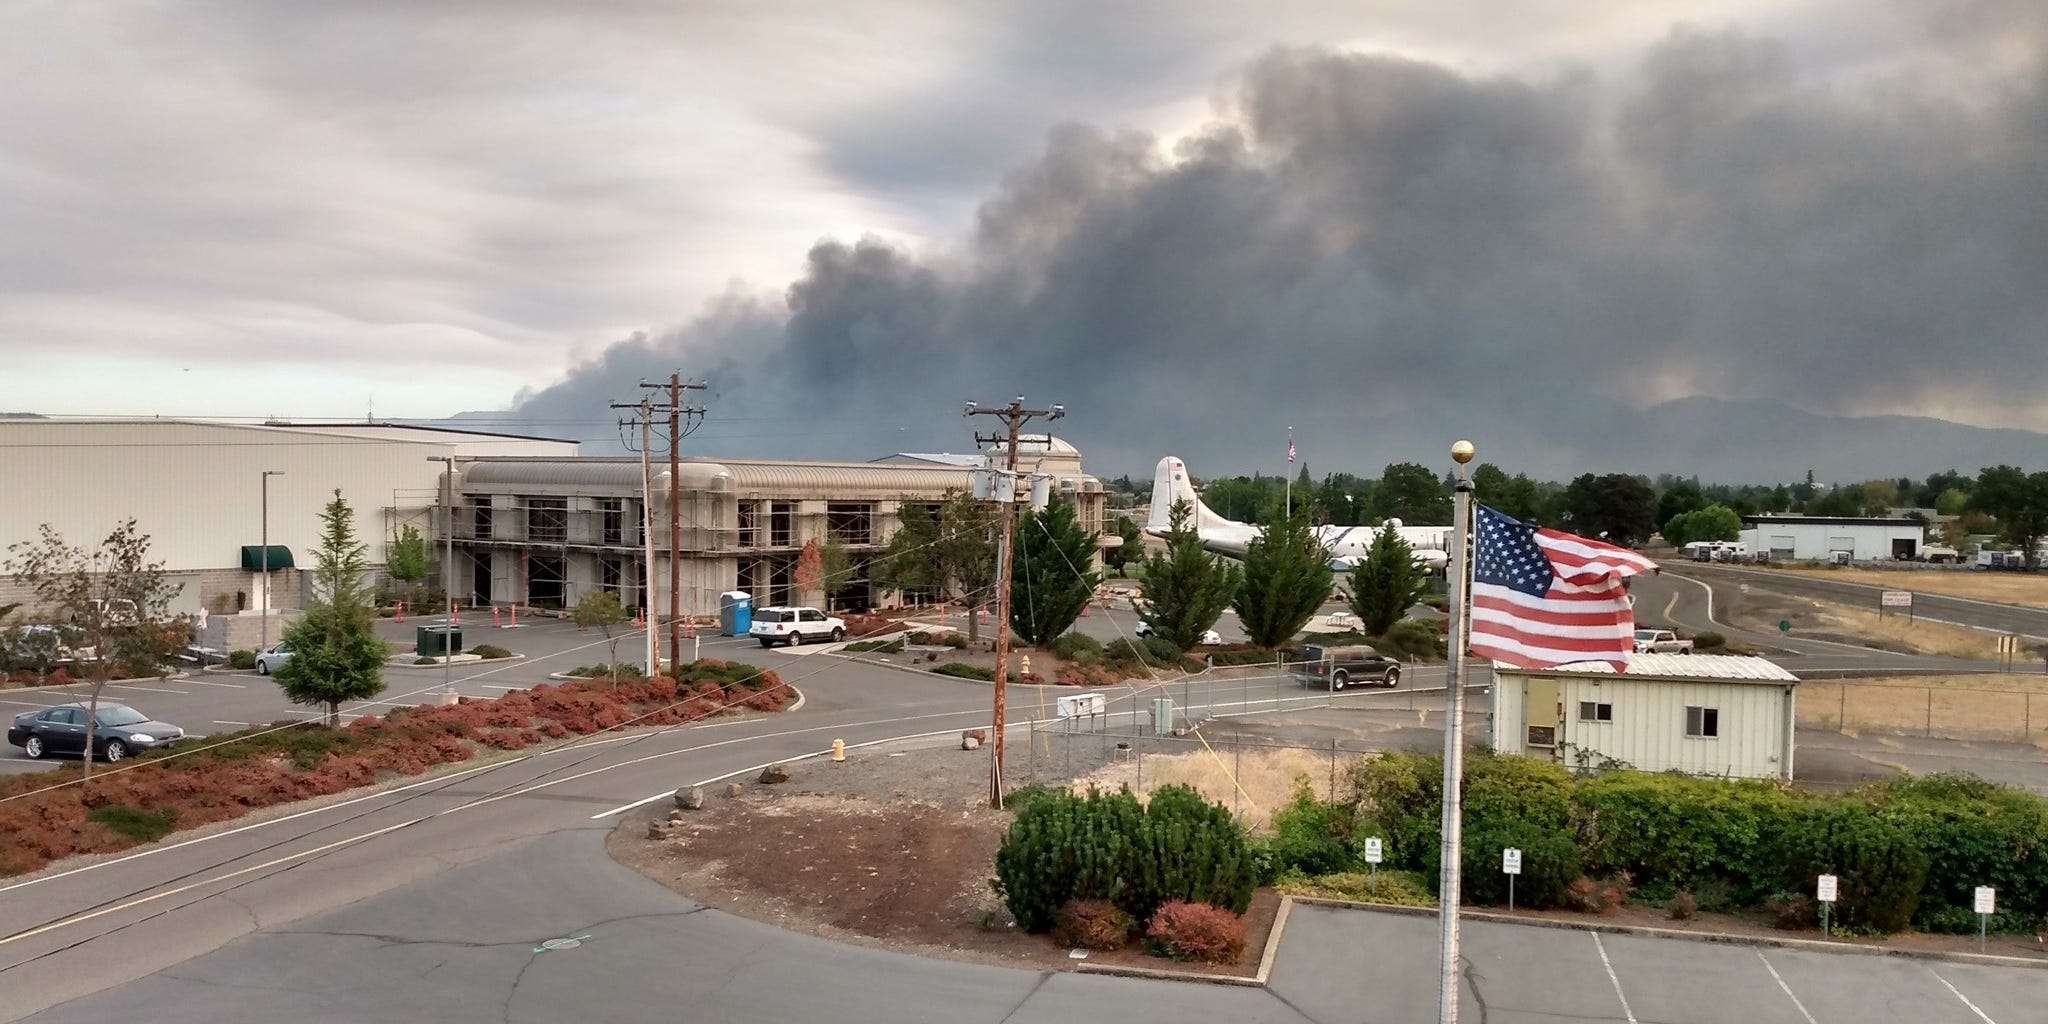 Residents of Medford, Oregon, ordered to evacuate as wildfire consumes